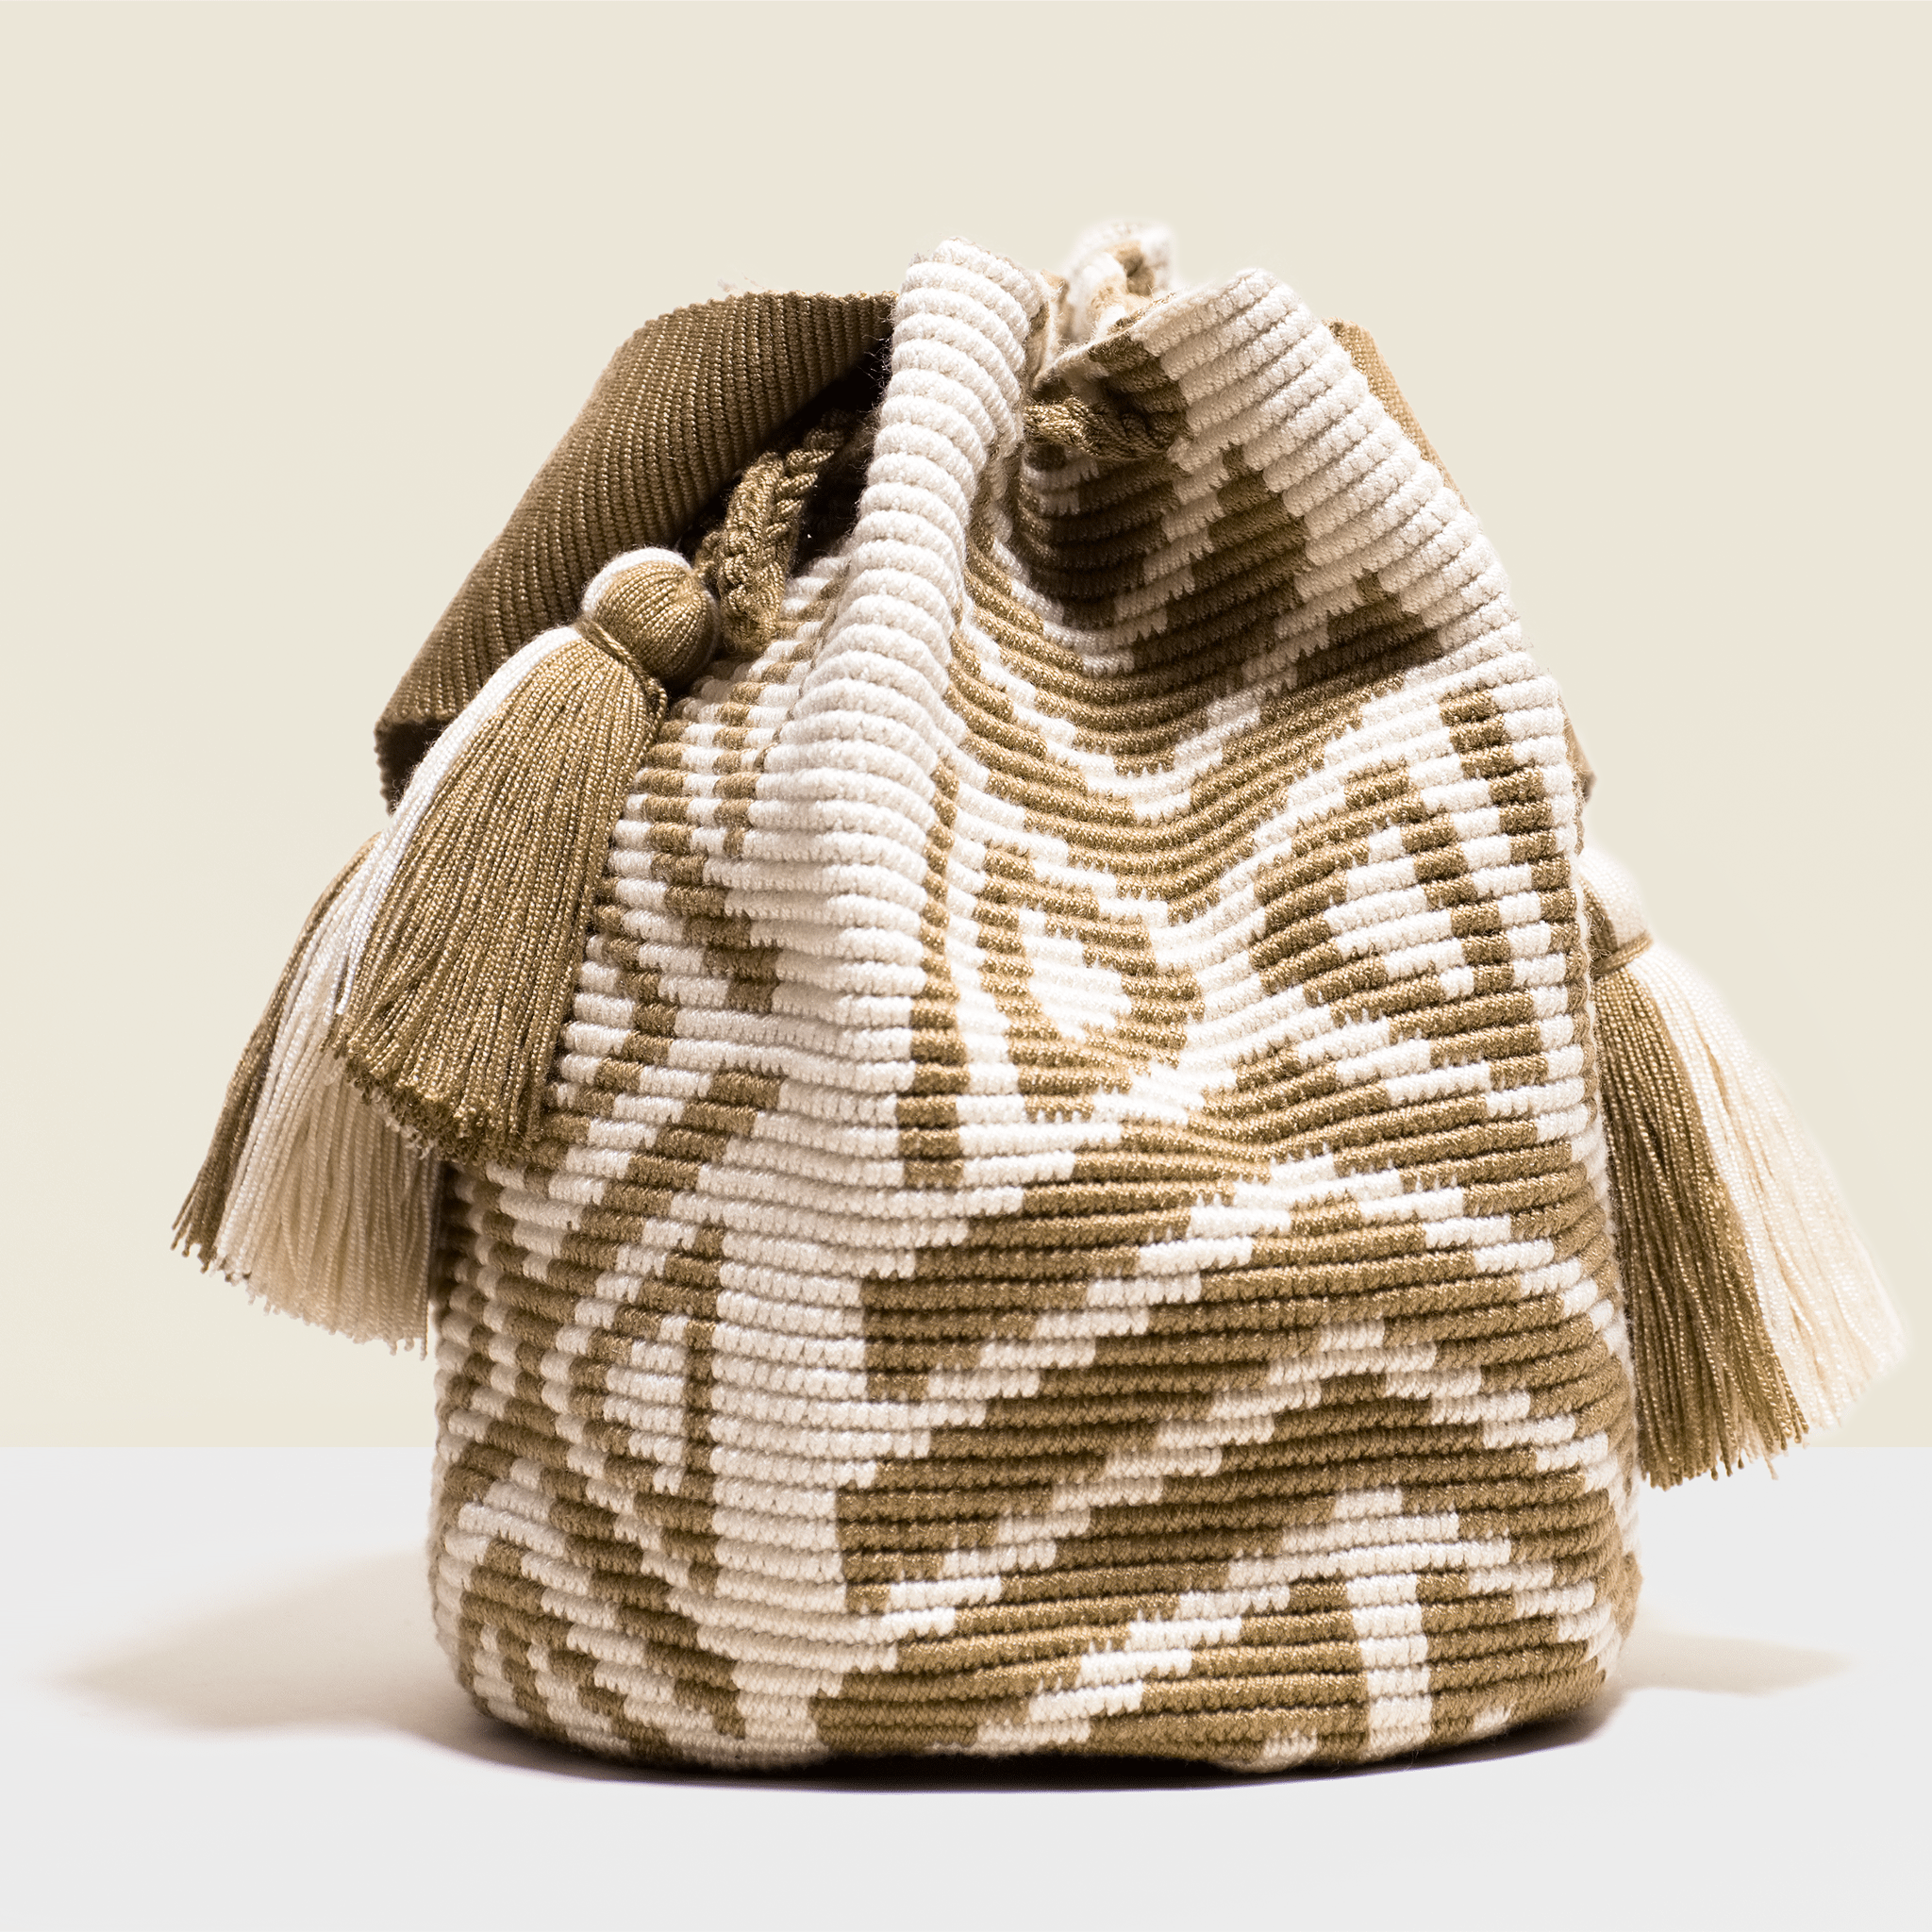 Boho chic crochet bag with brown geometrical design on cream base. Tassels to match, Washable.